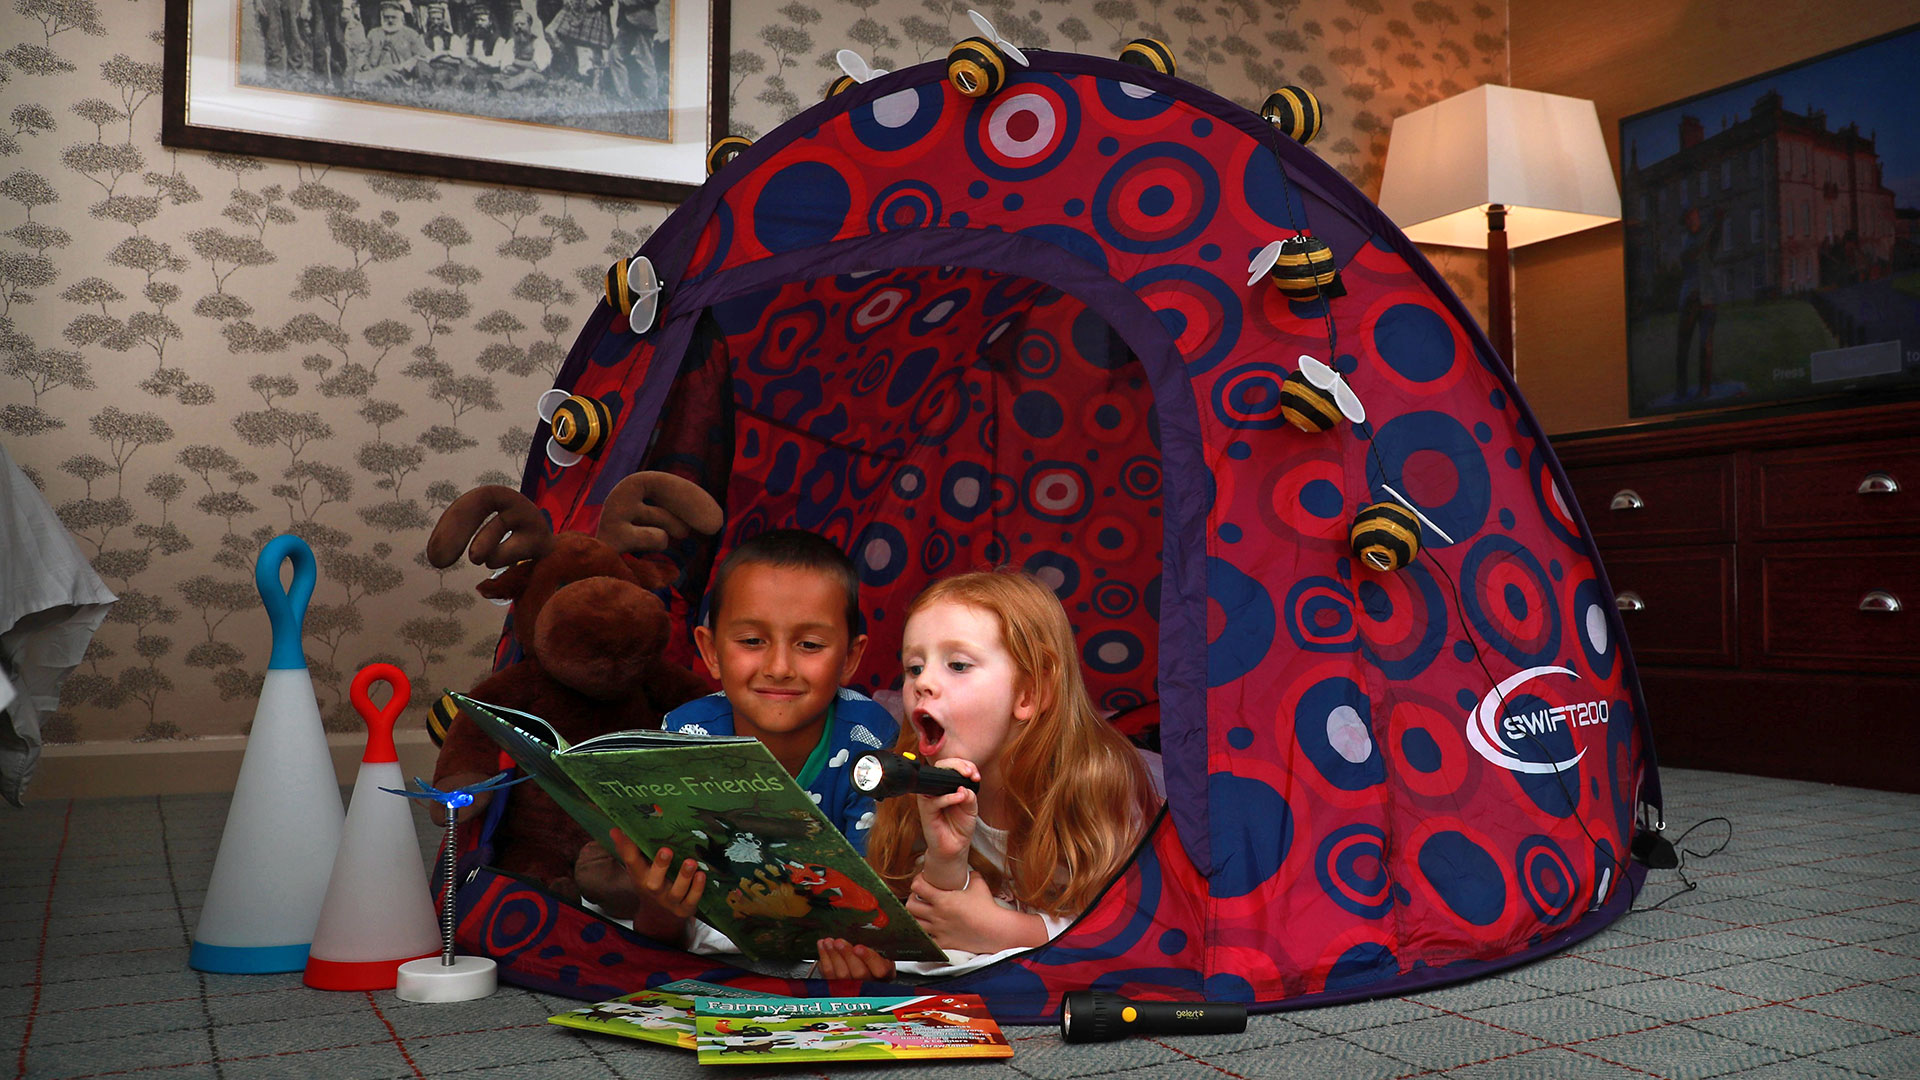 Children's in-room camping experience at the Dalmahoy Hotel & Country Club, Edinburgh